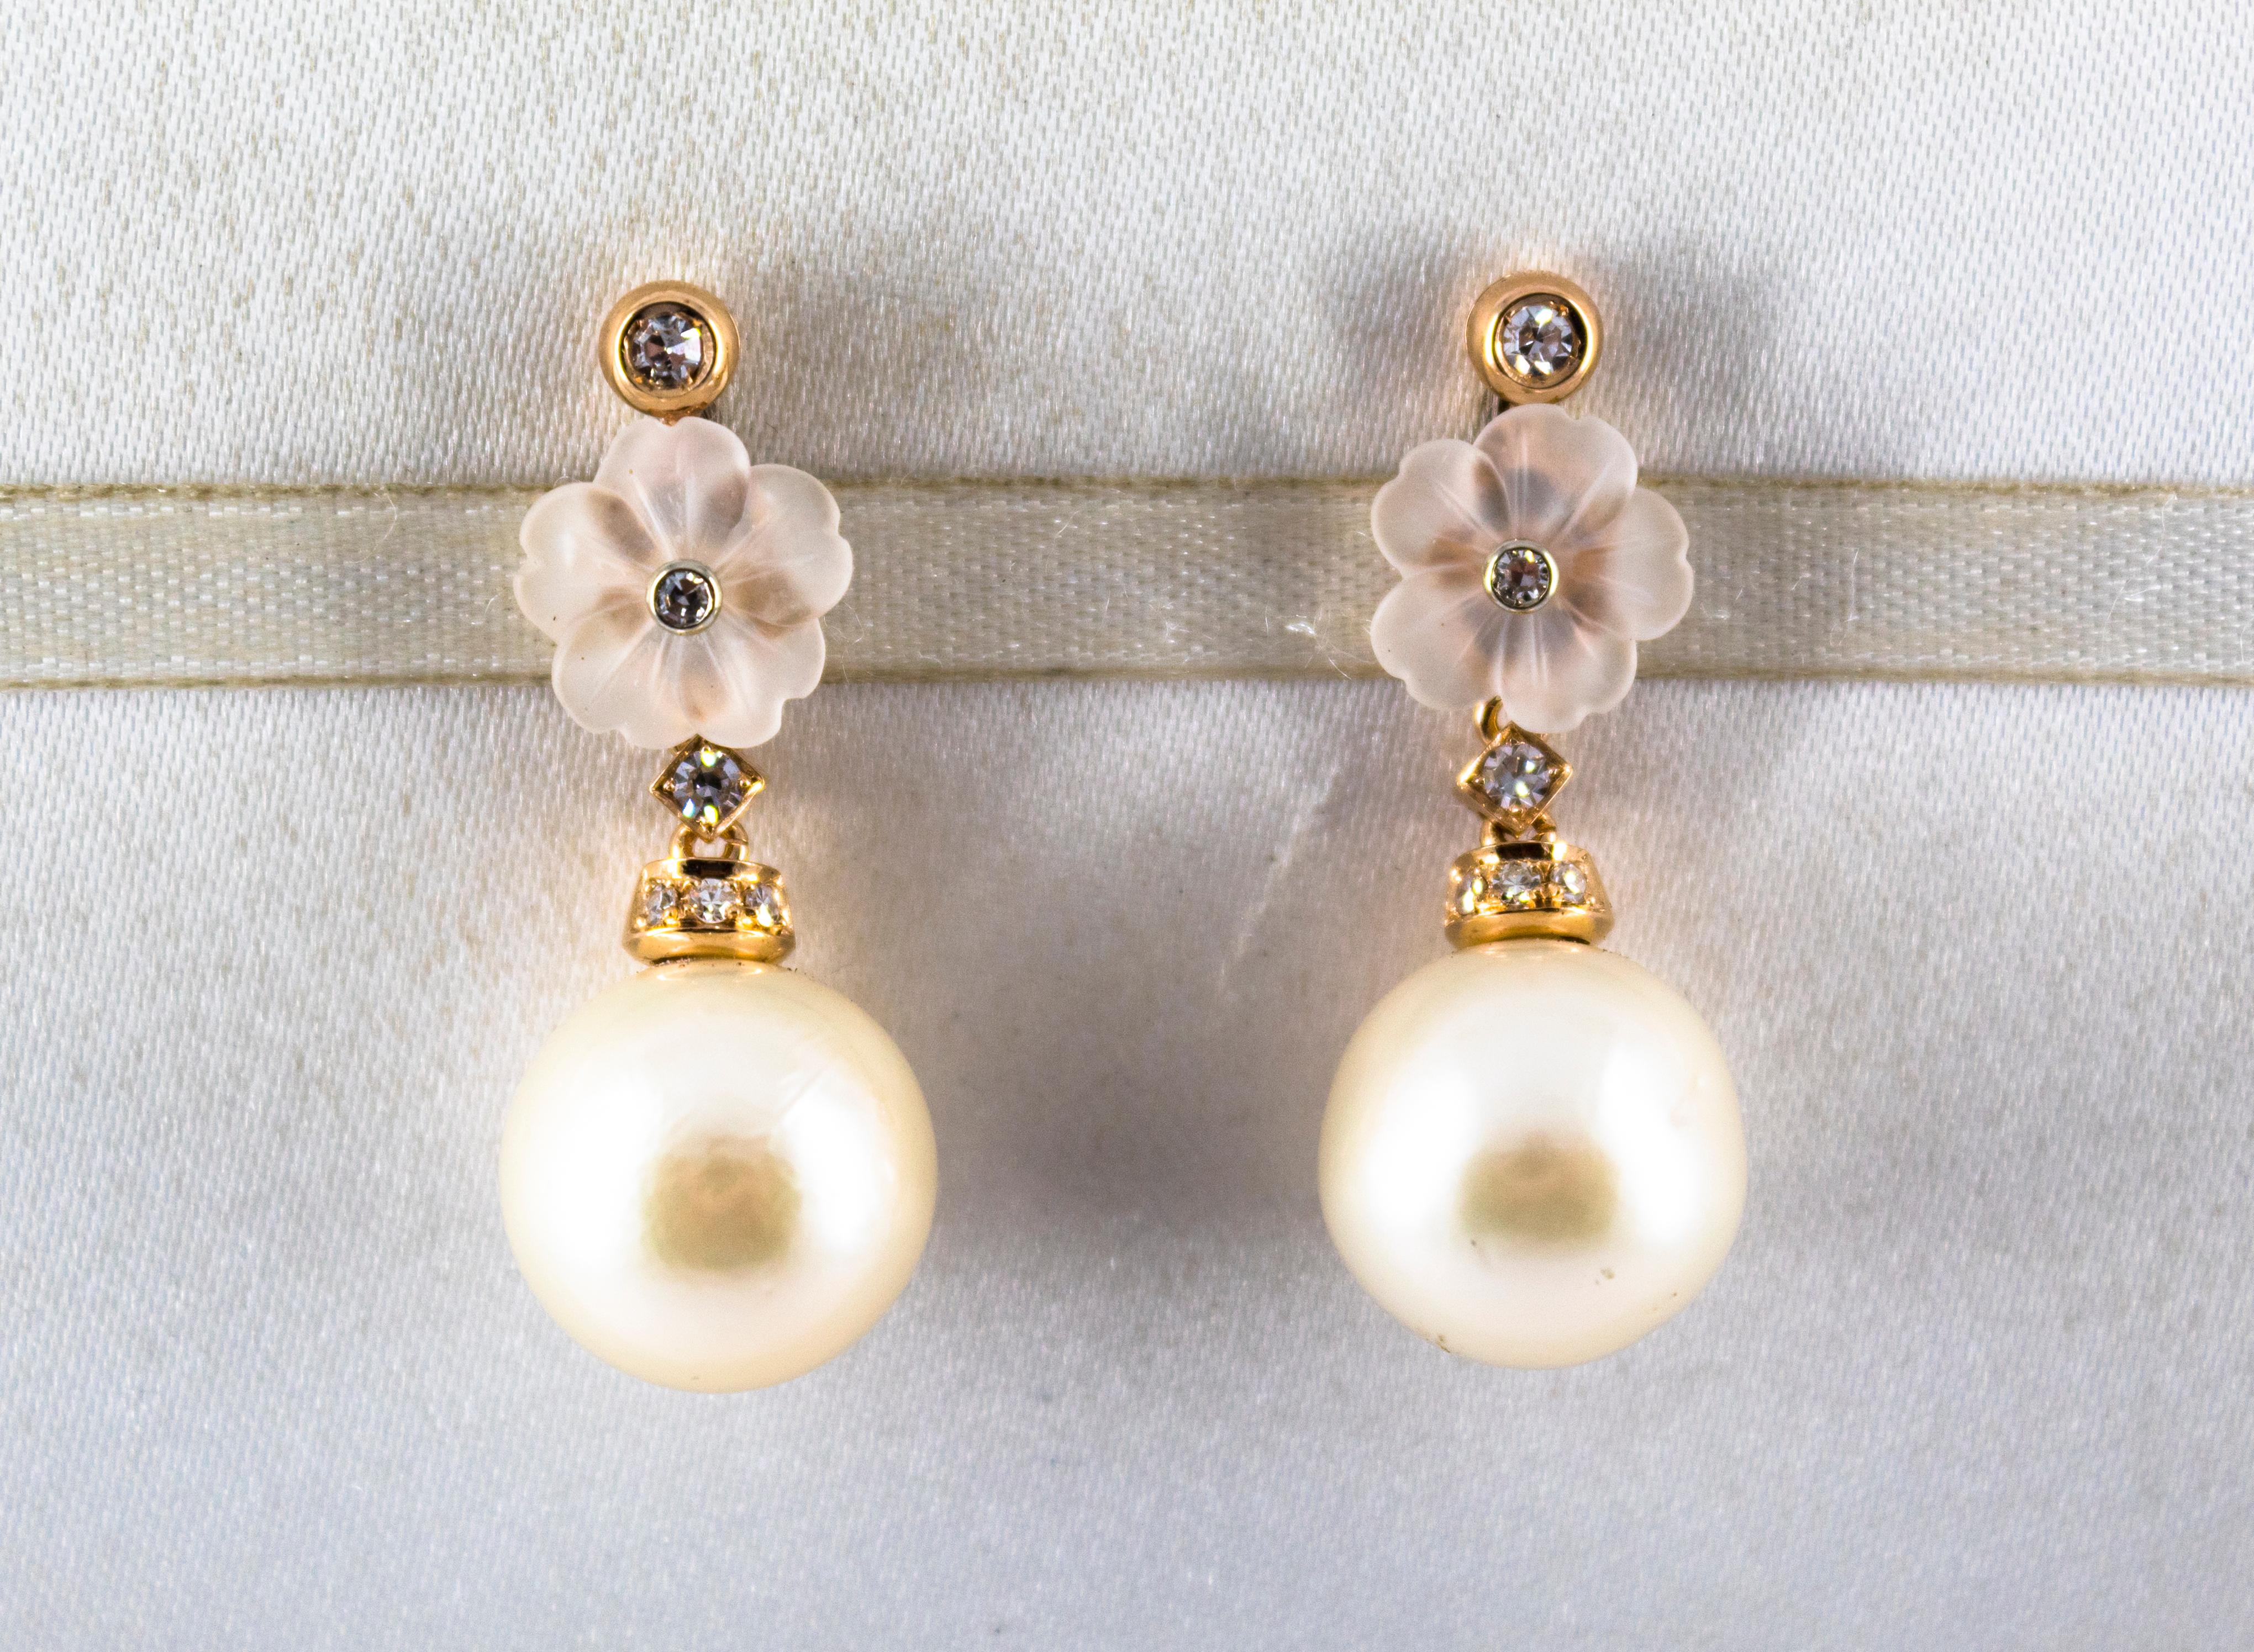 These Stud Earrings are made of 14K Yellow Gold.
These Earrings have 0.20 Carats of White Diamonds.
These Earrings have also 35.00 Carats of Pearls and Rock Crystal.
These Earrings are available also with Green Flowers made of Agate or Purple